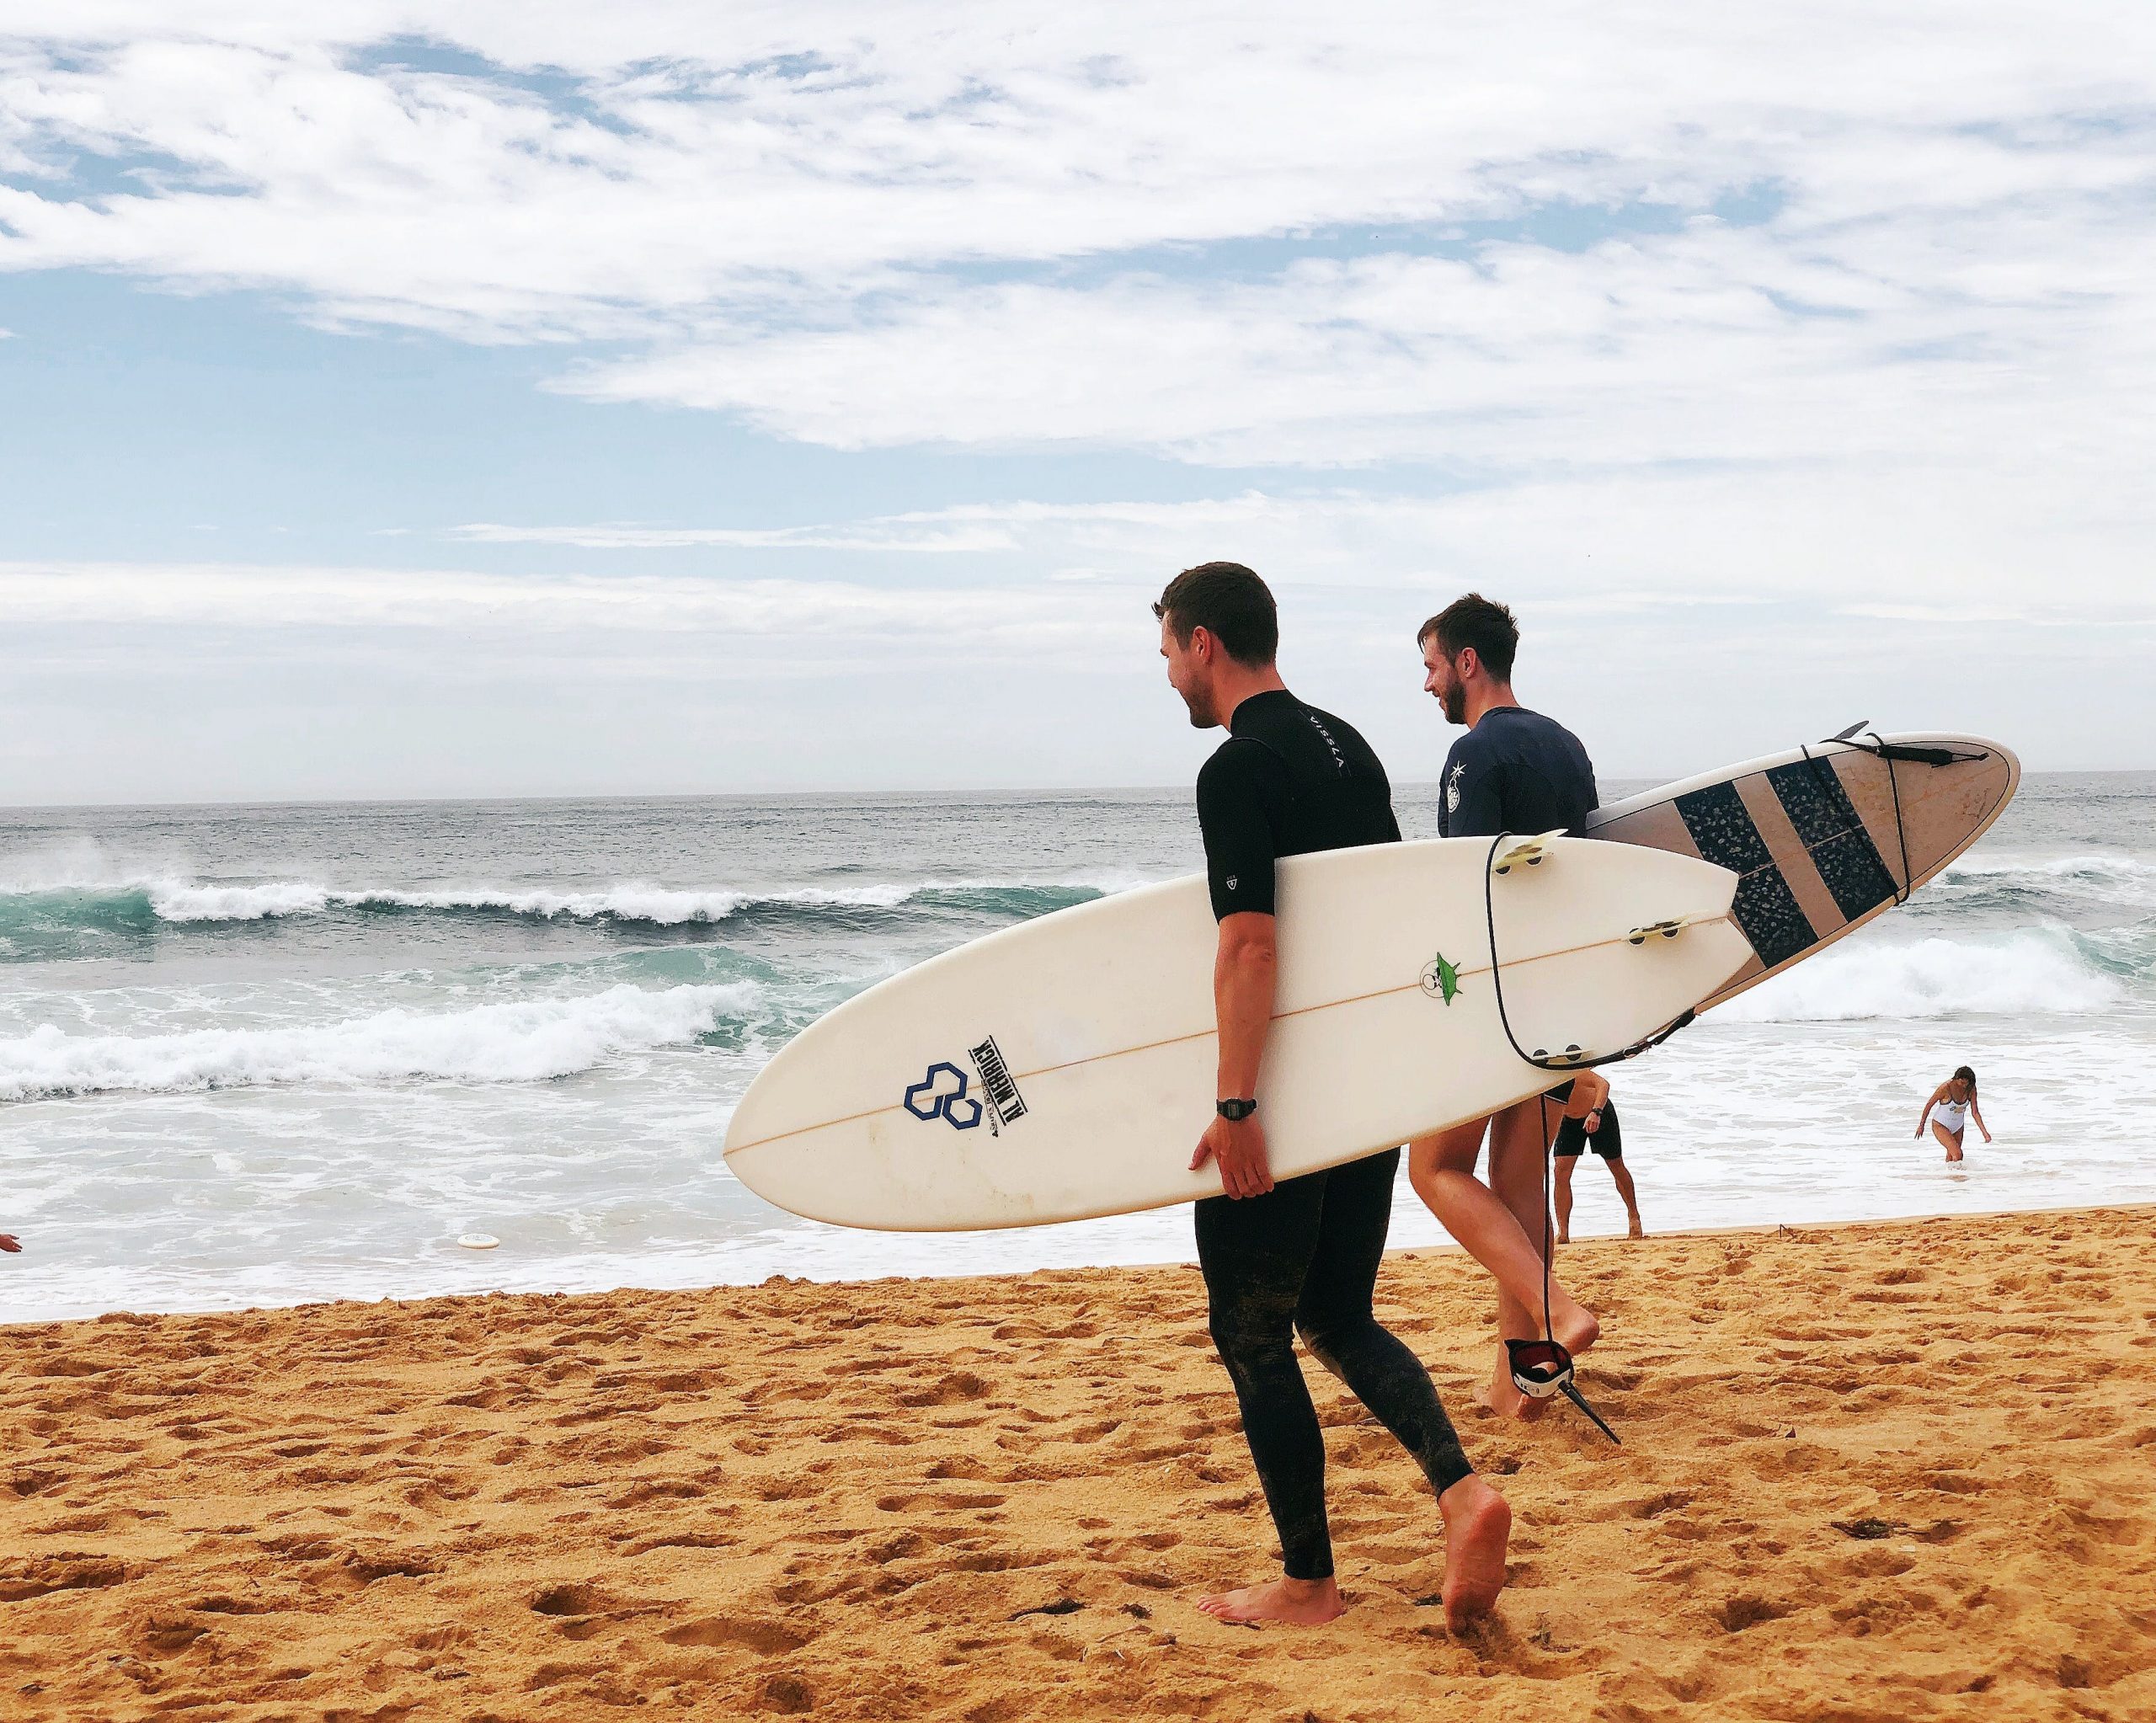 Two surfers walking on the beach with surfboards, ready to enter the ocean waves. 